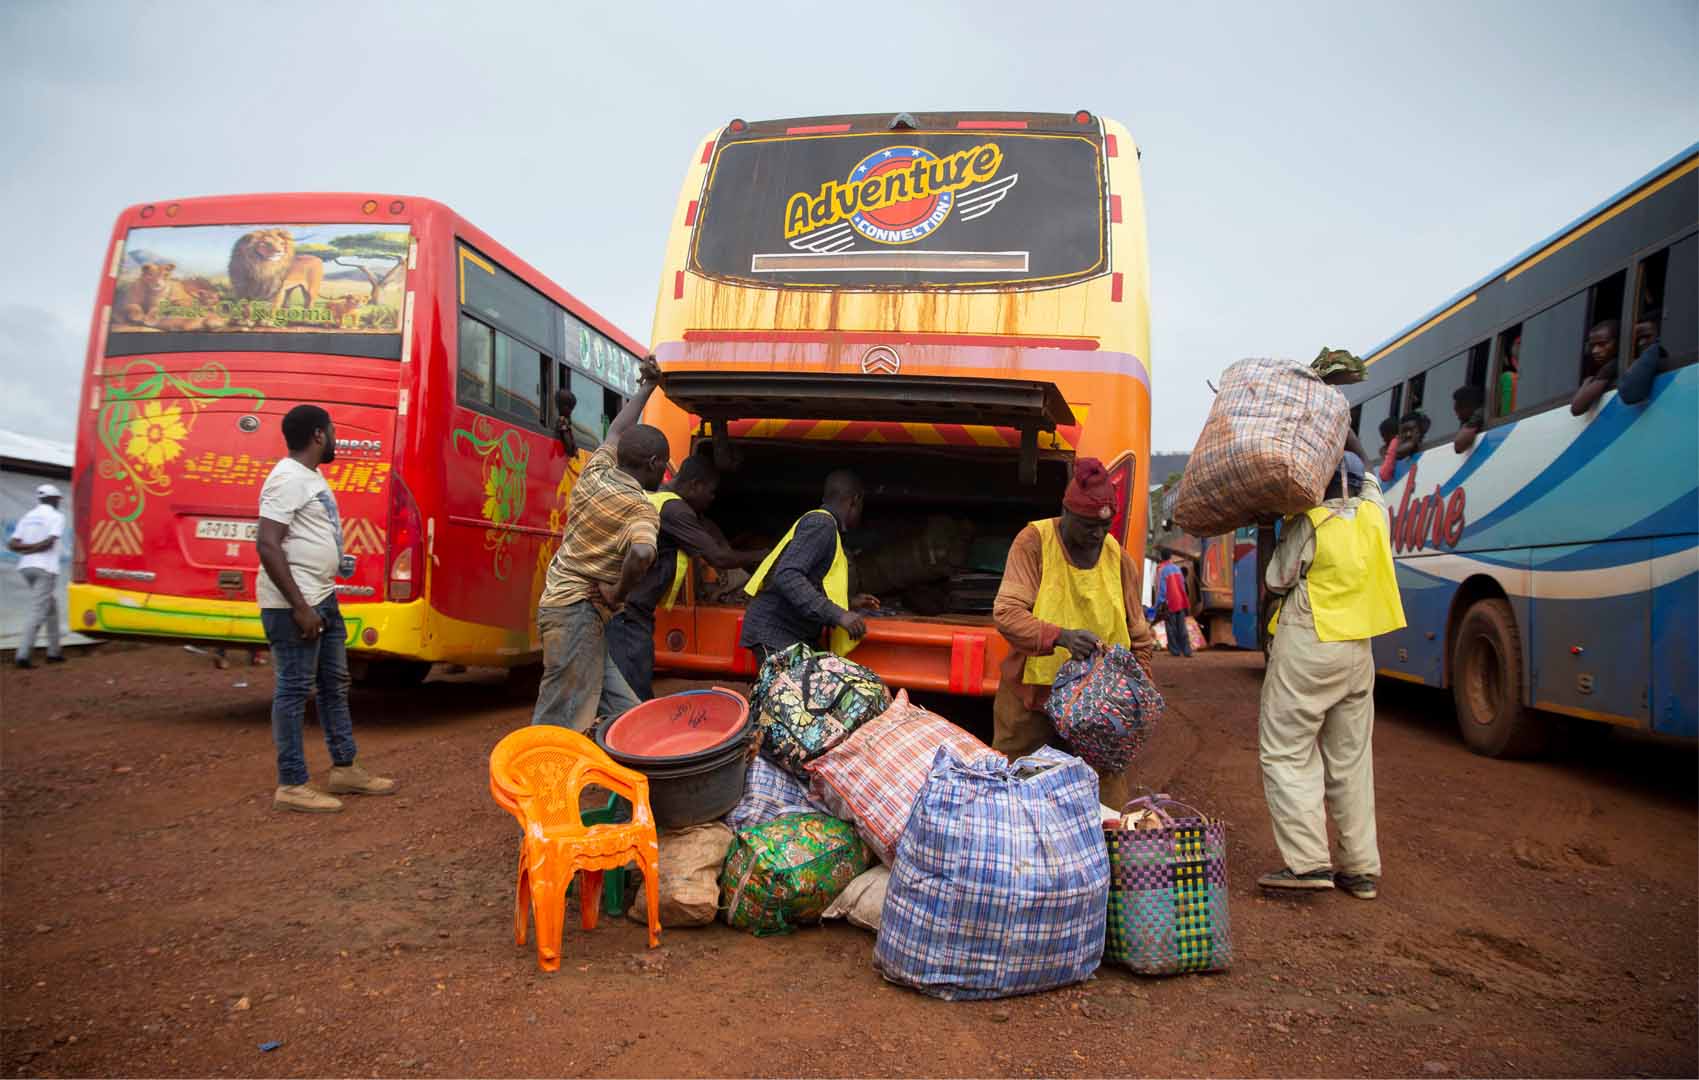 People take out the belongings of Burundian refugees from a bus which transported them from Tanzania to neighbouring Burundi, as part of a repartition program, at the Nyabitare transit site, in the Gisuru commune, Ruyigi province, Burundi, October 3, 2019.